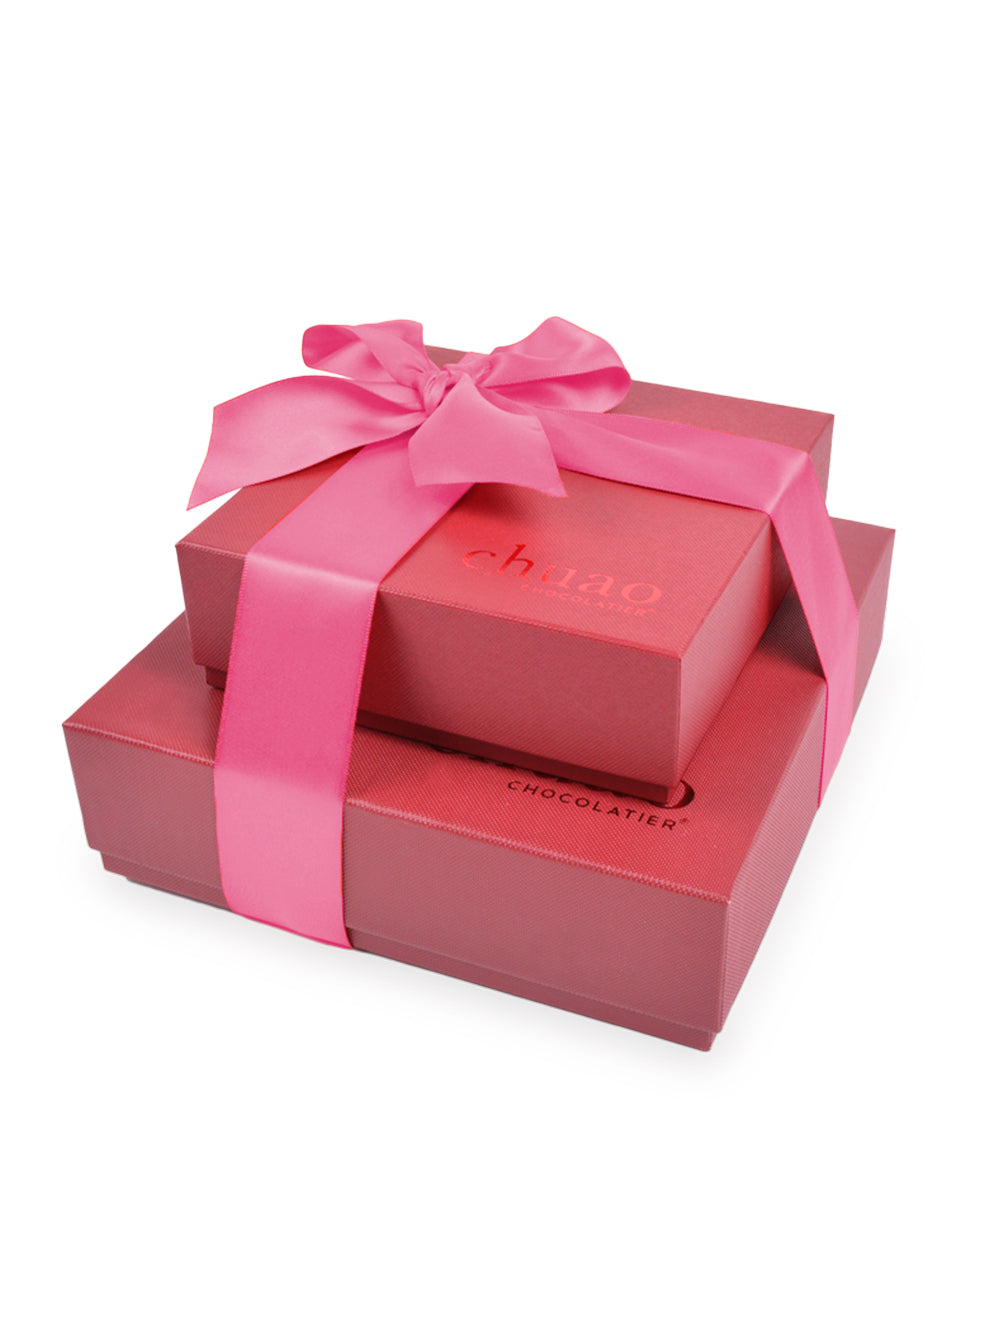 2 red chuao chocolatier gift boxes stacked and tied with a pink ribbon